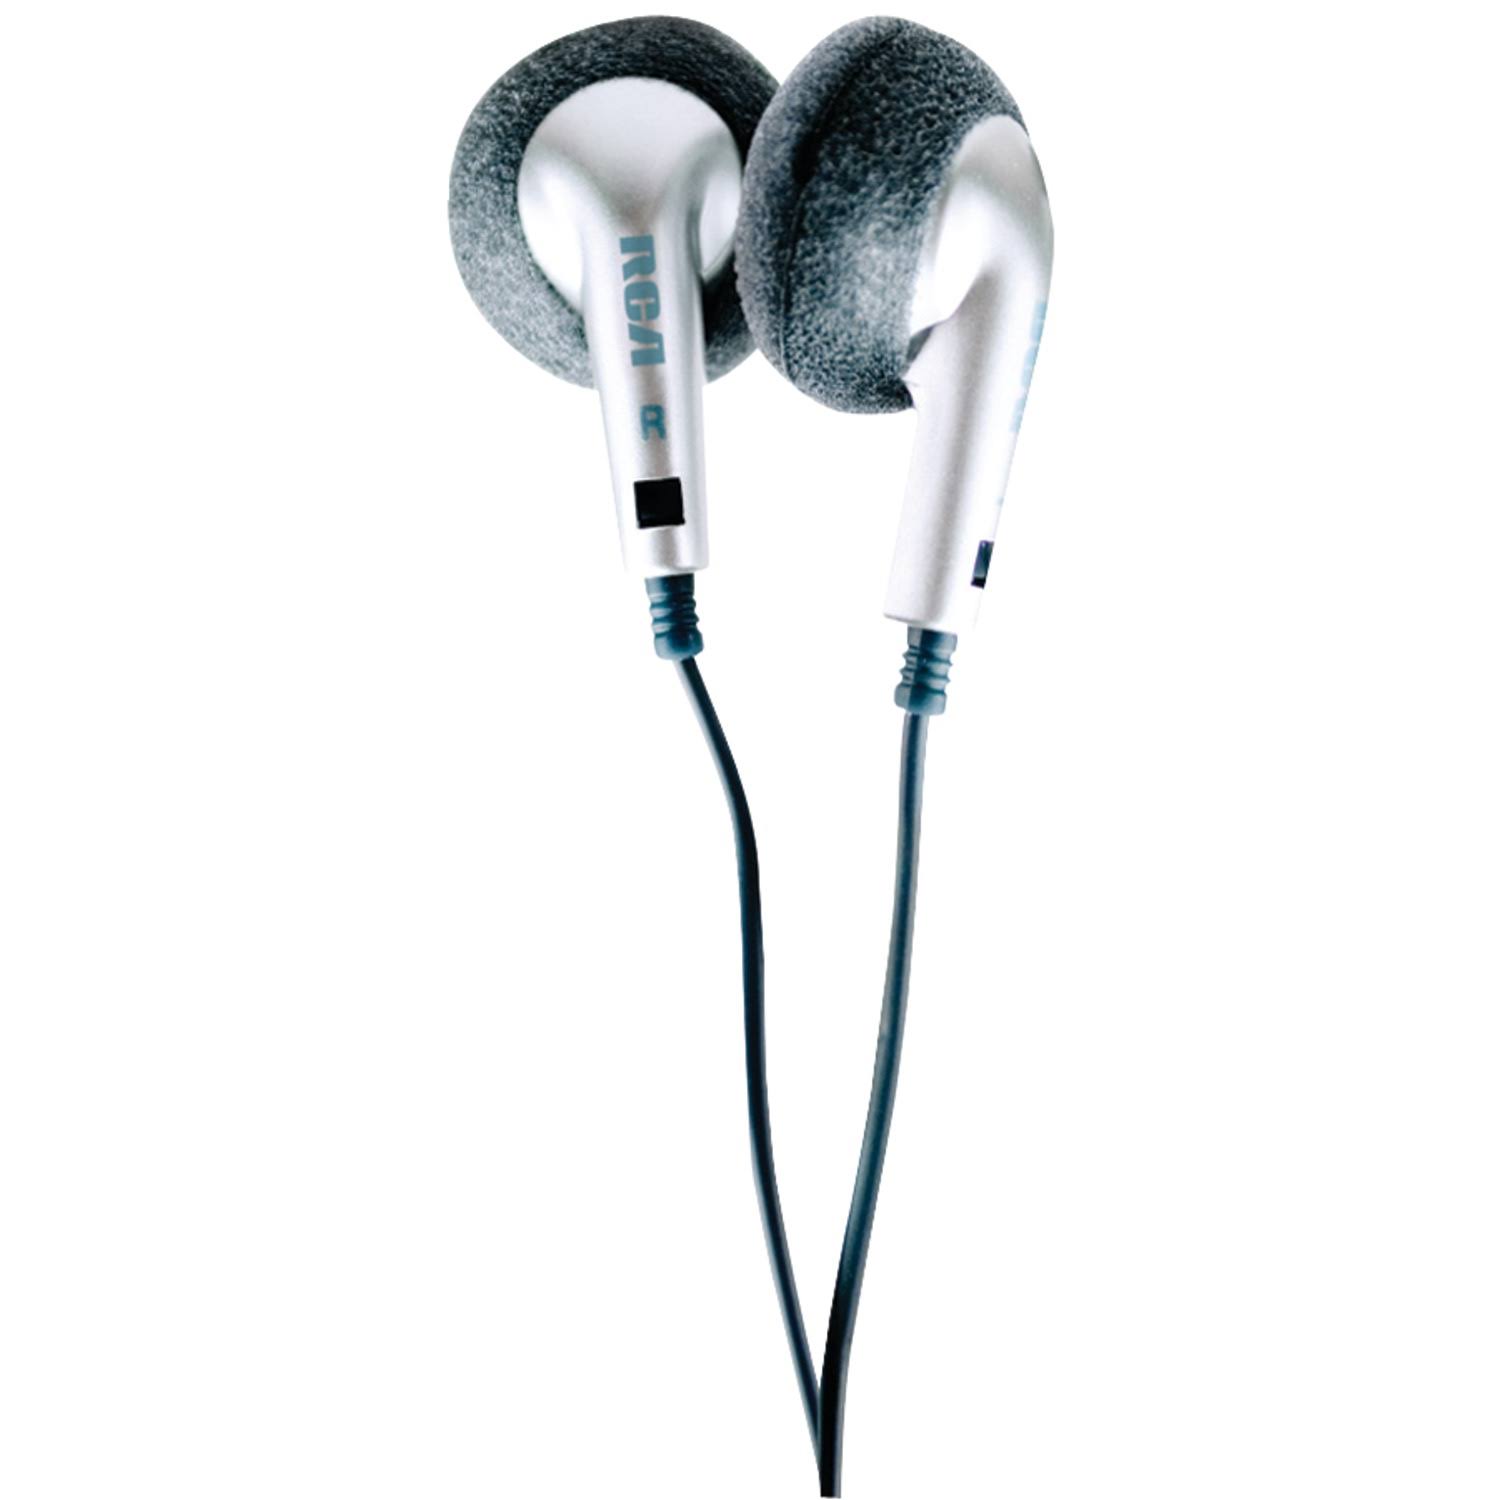 Rca Hp57r Basic Stereo Earbuds With Foam Covers - Silver